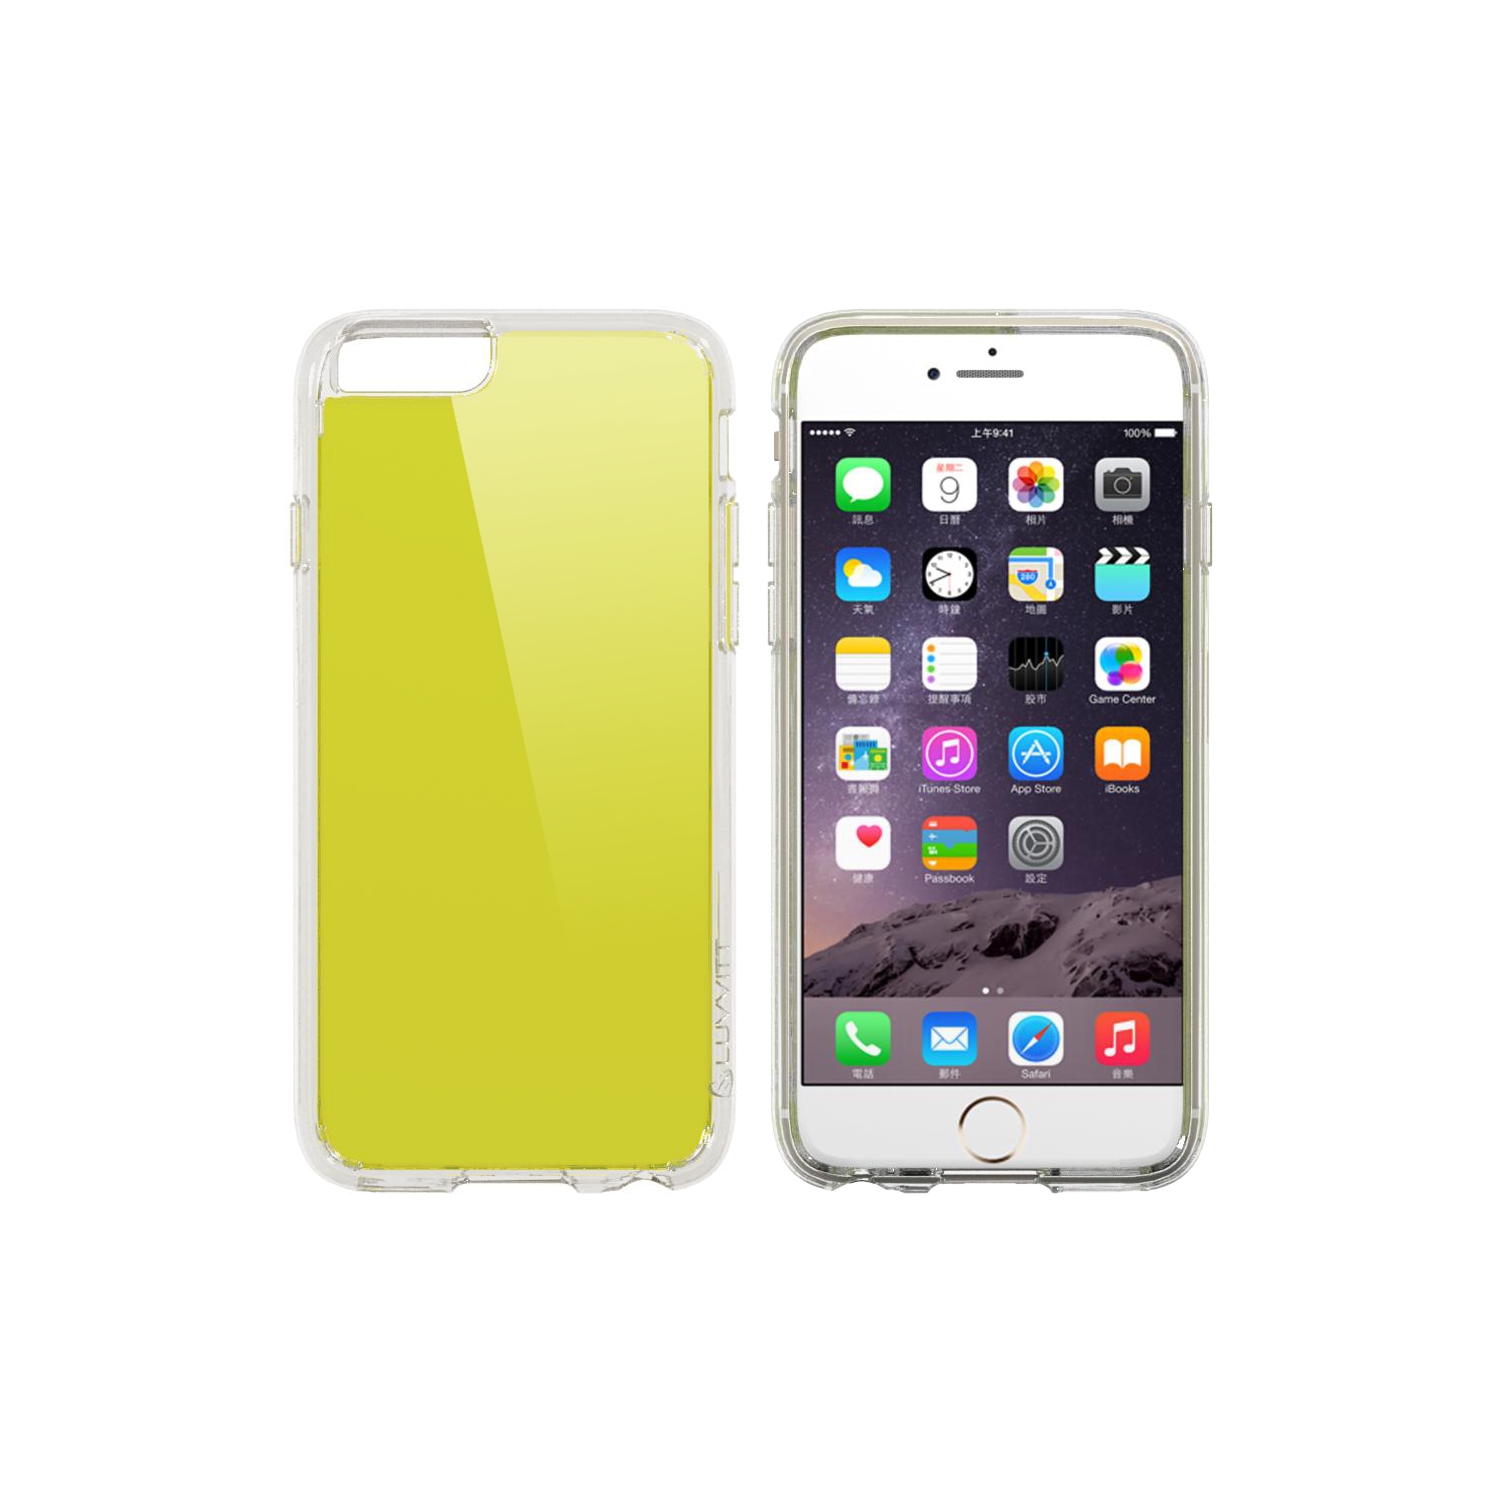 LUVVITT CLEARVIEW Case for iPhone 6 / 6S | Back Cover for iPhone 6 / 6S - Clear